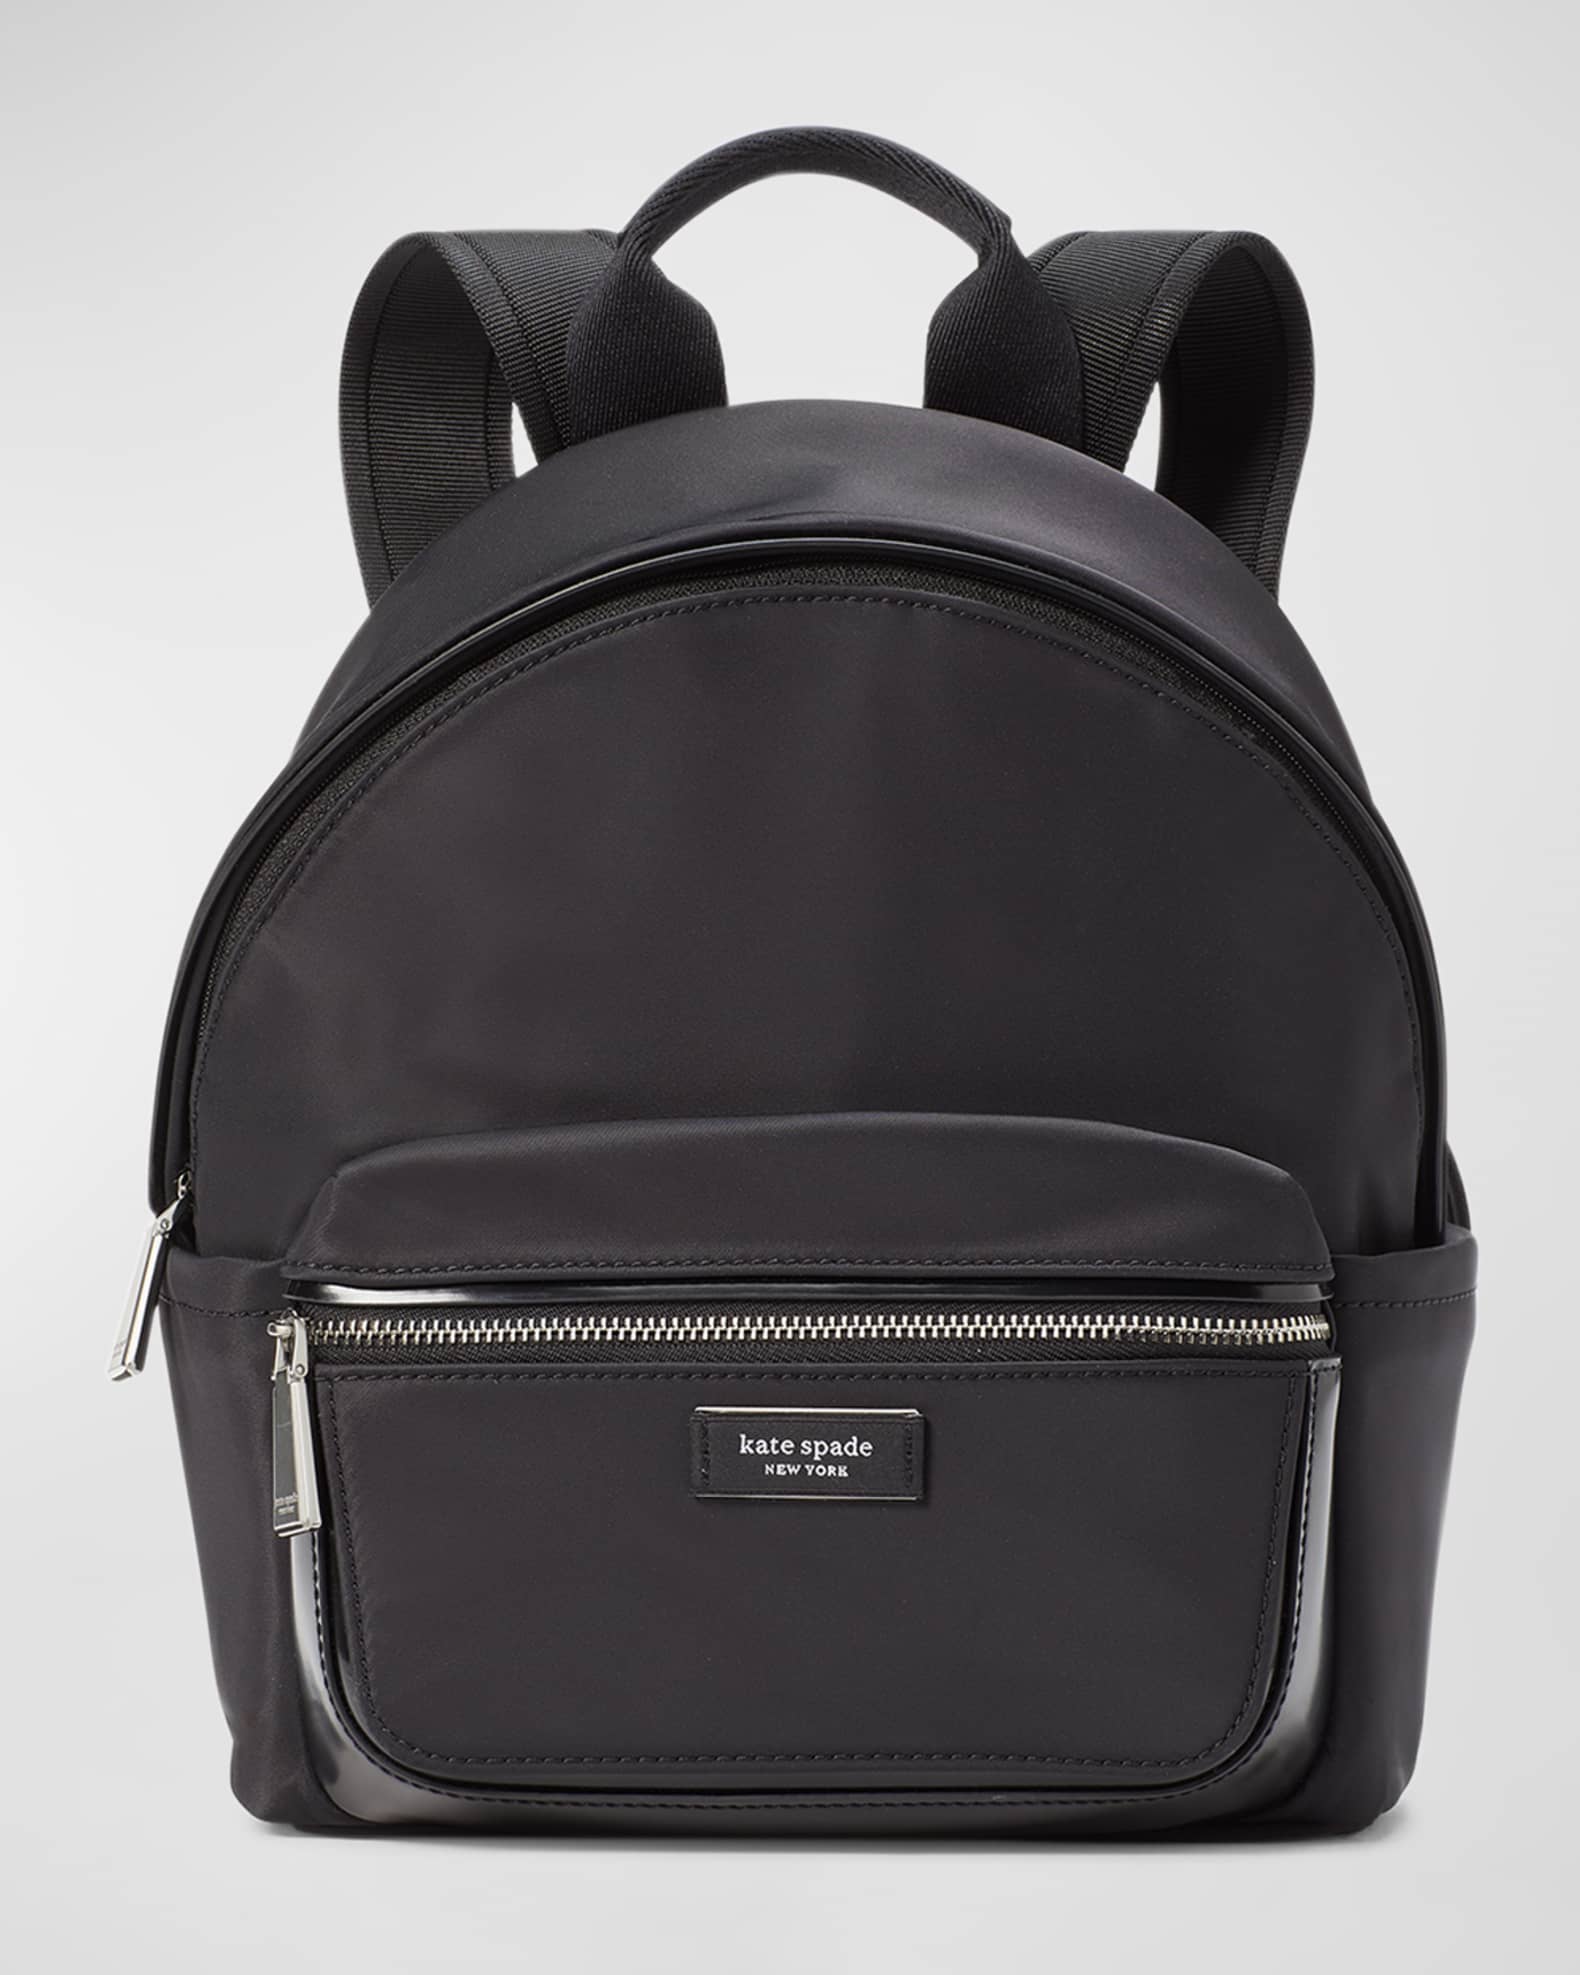 kate spade new york sam icon ksnyl small leather backpack | Neiman